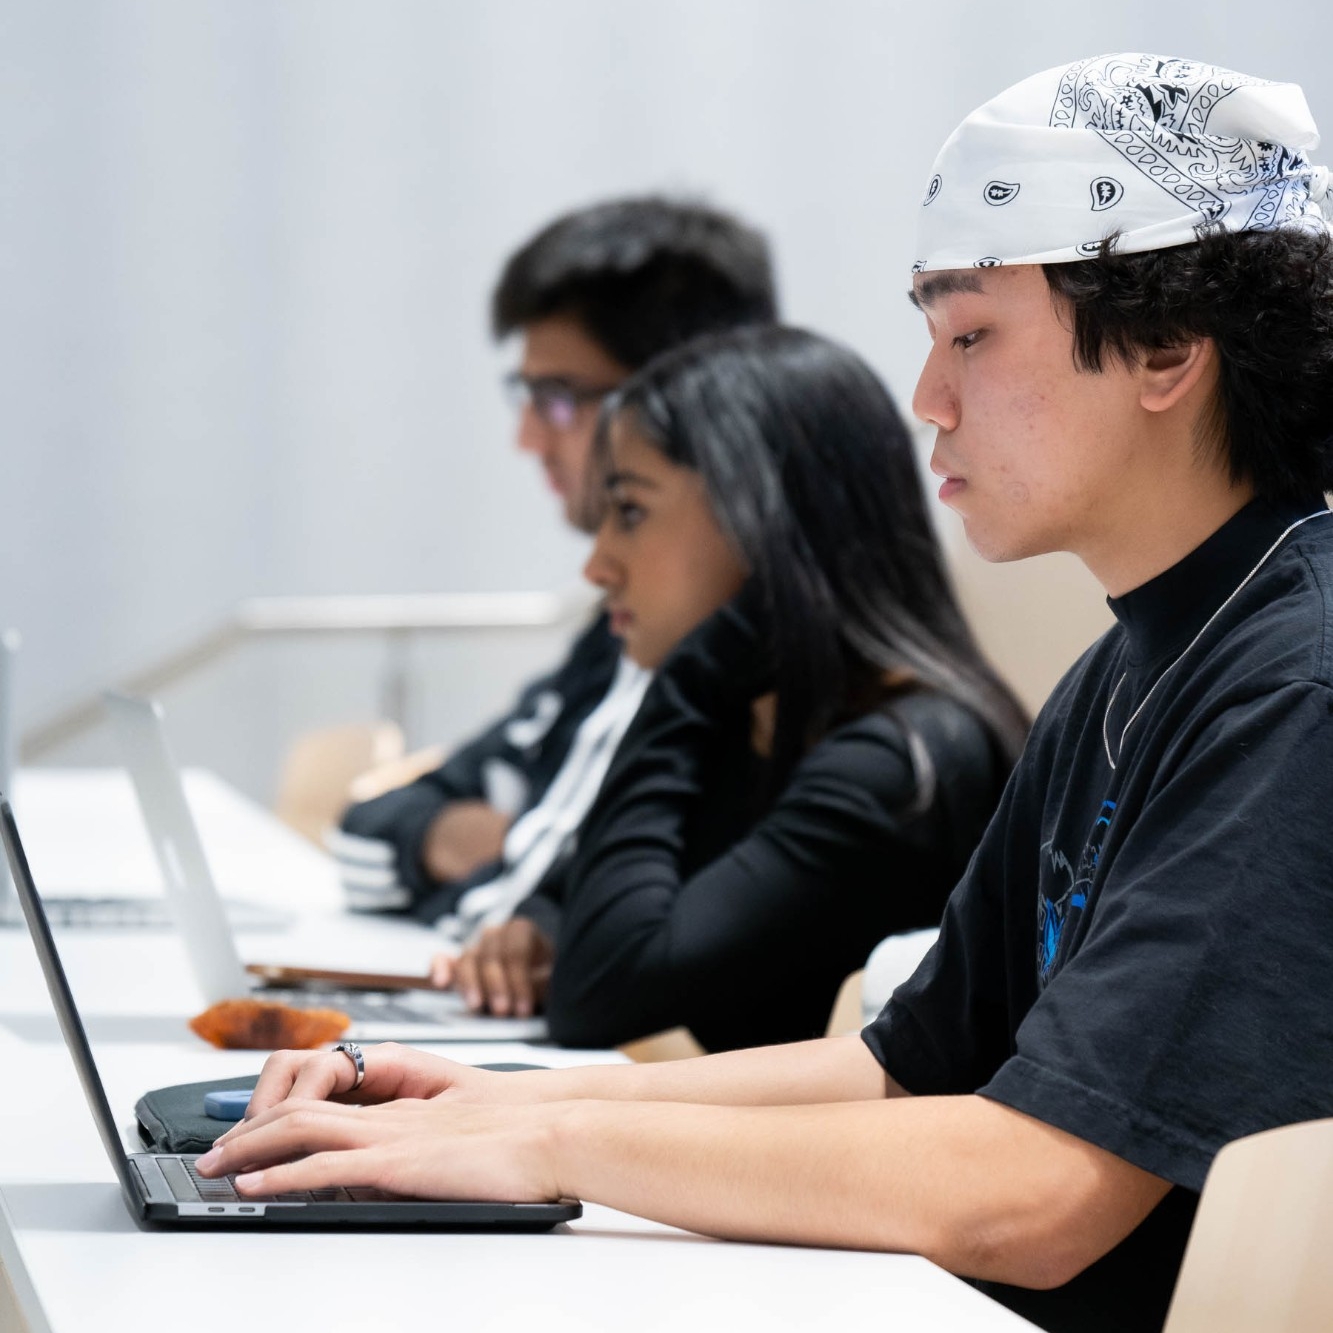 Three students taking notes on their laptops during a lecture in SFU Surrey.